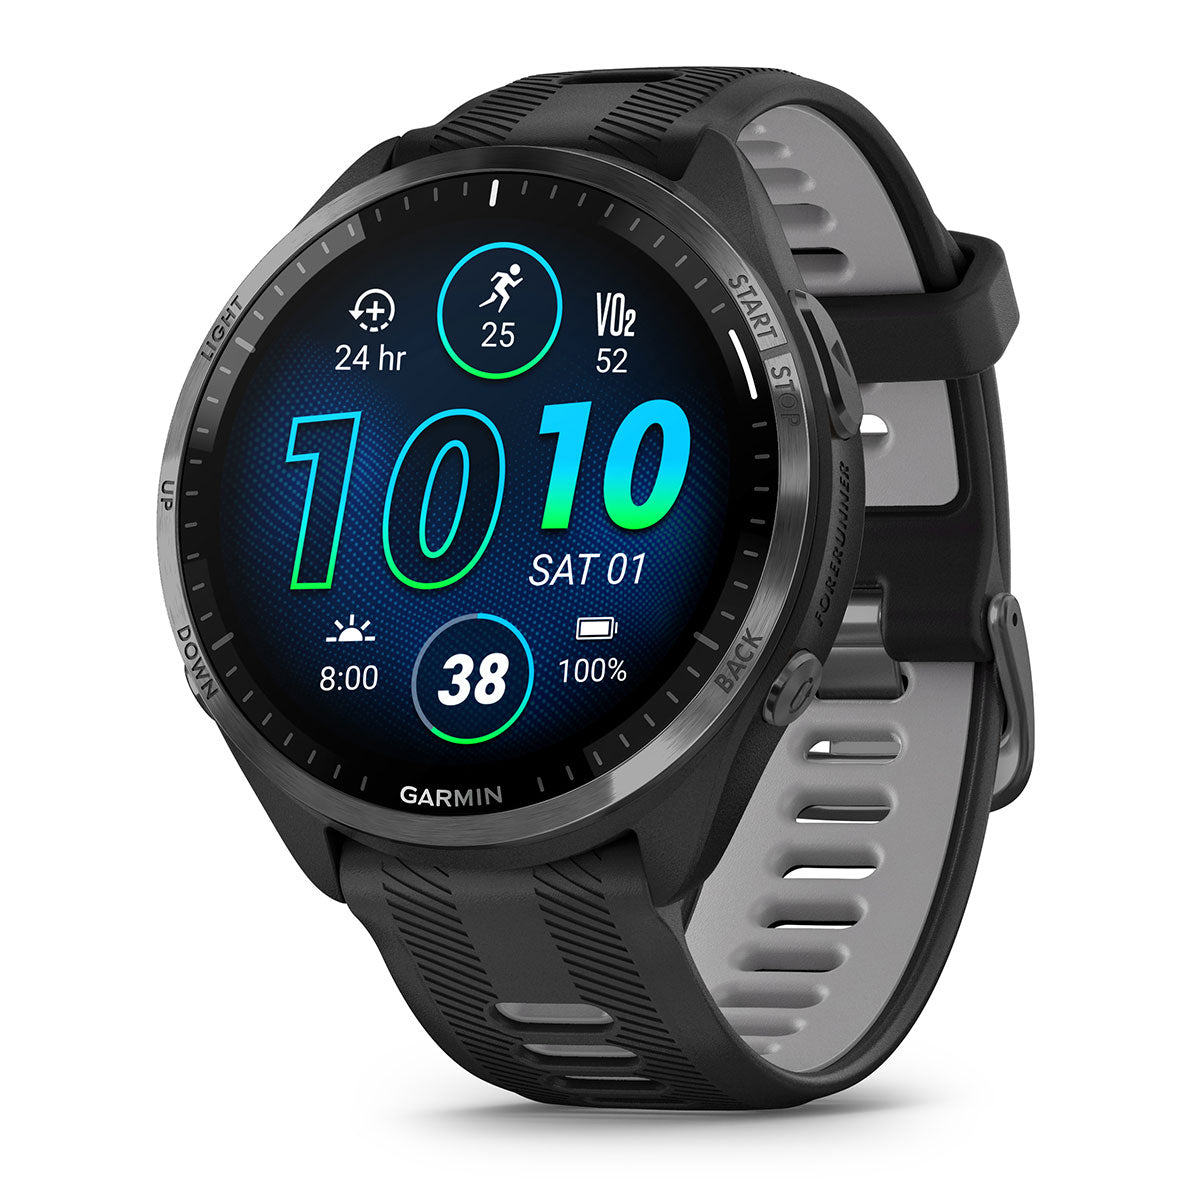 Garmin Forerunner 965 (Black/Powder Gray) Premium Running & Triathlon GPS Smartwatch | Bundle with PlayBetter Screen Protectors & Portable Charger - image 3 of 9